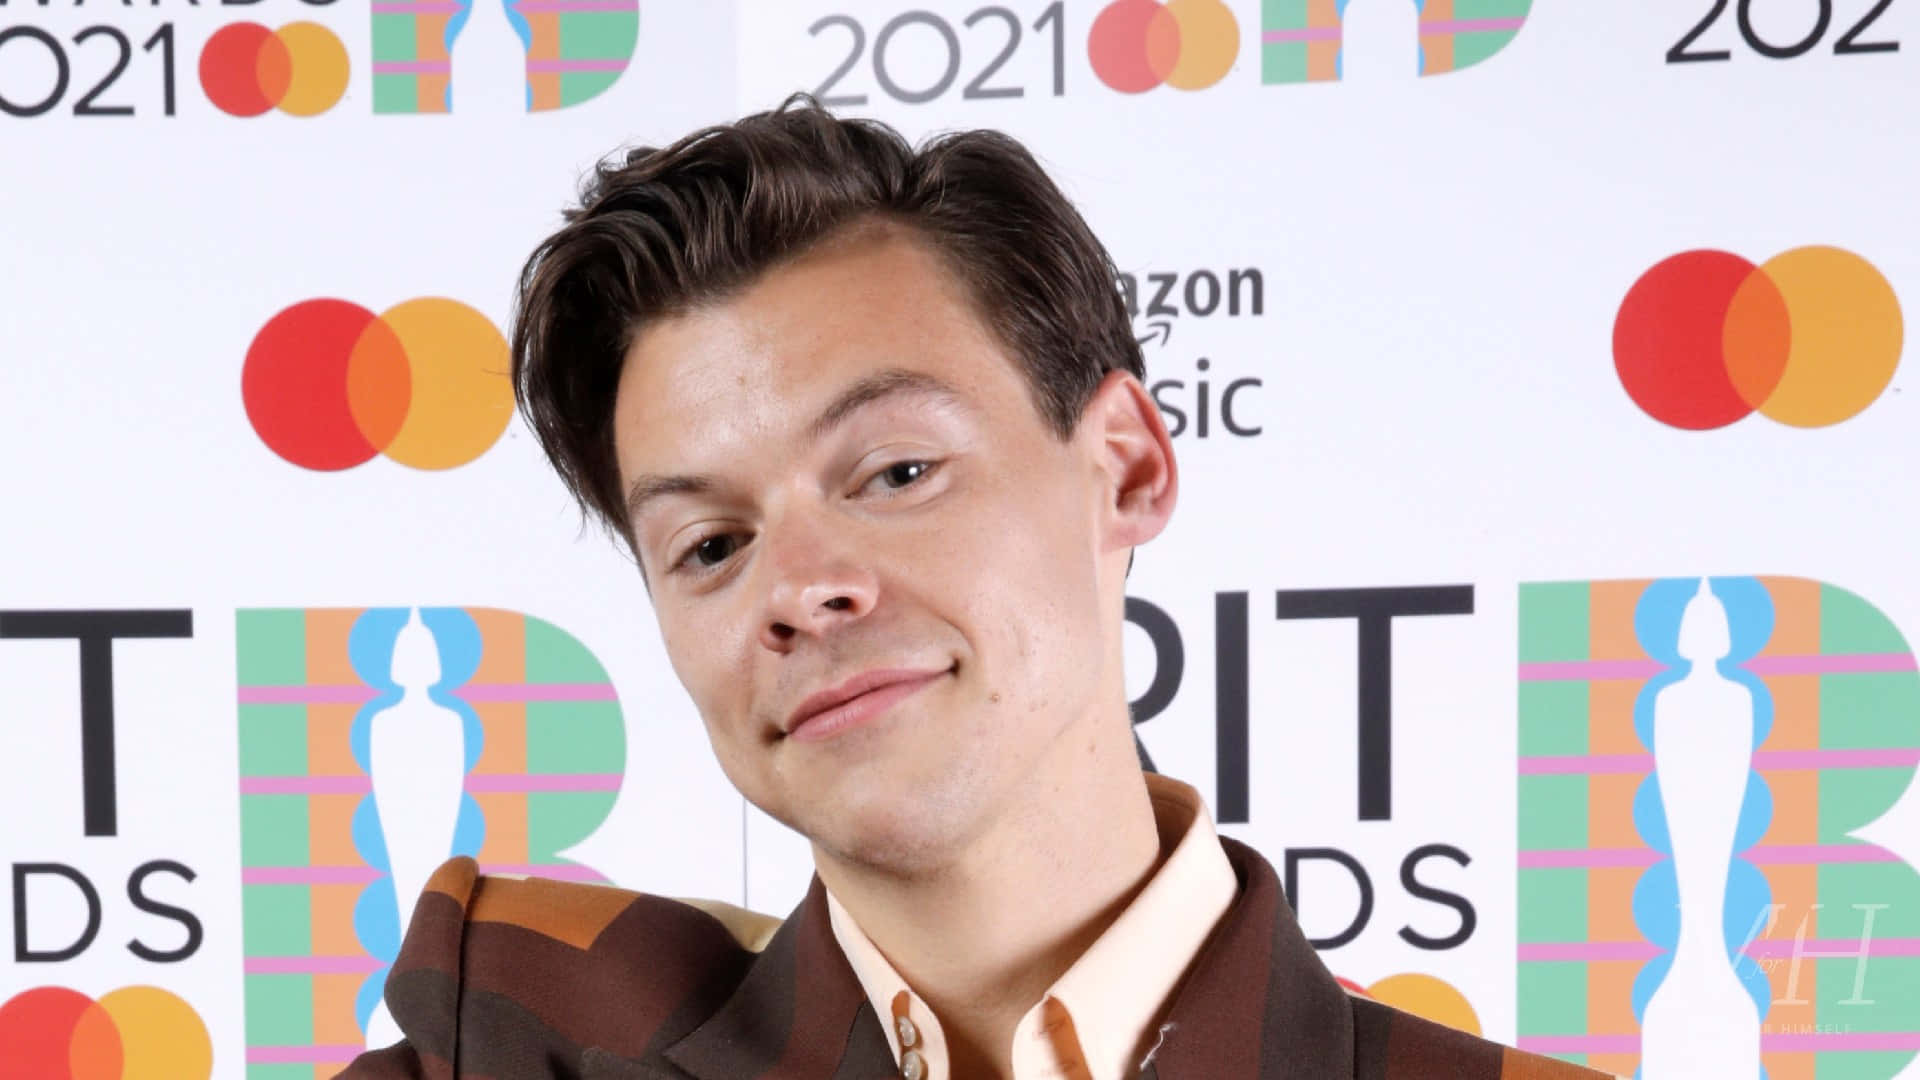 Harry Styles oozing charm and edge in 2021